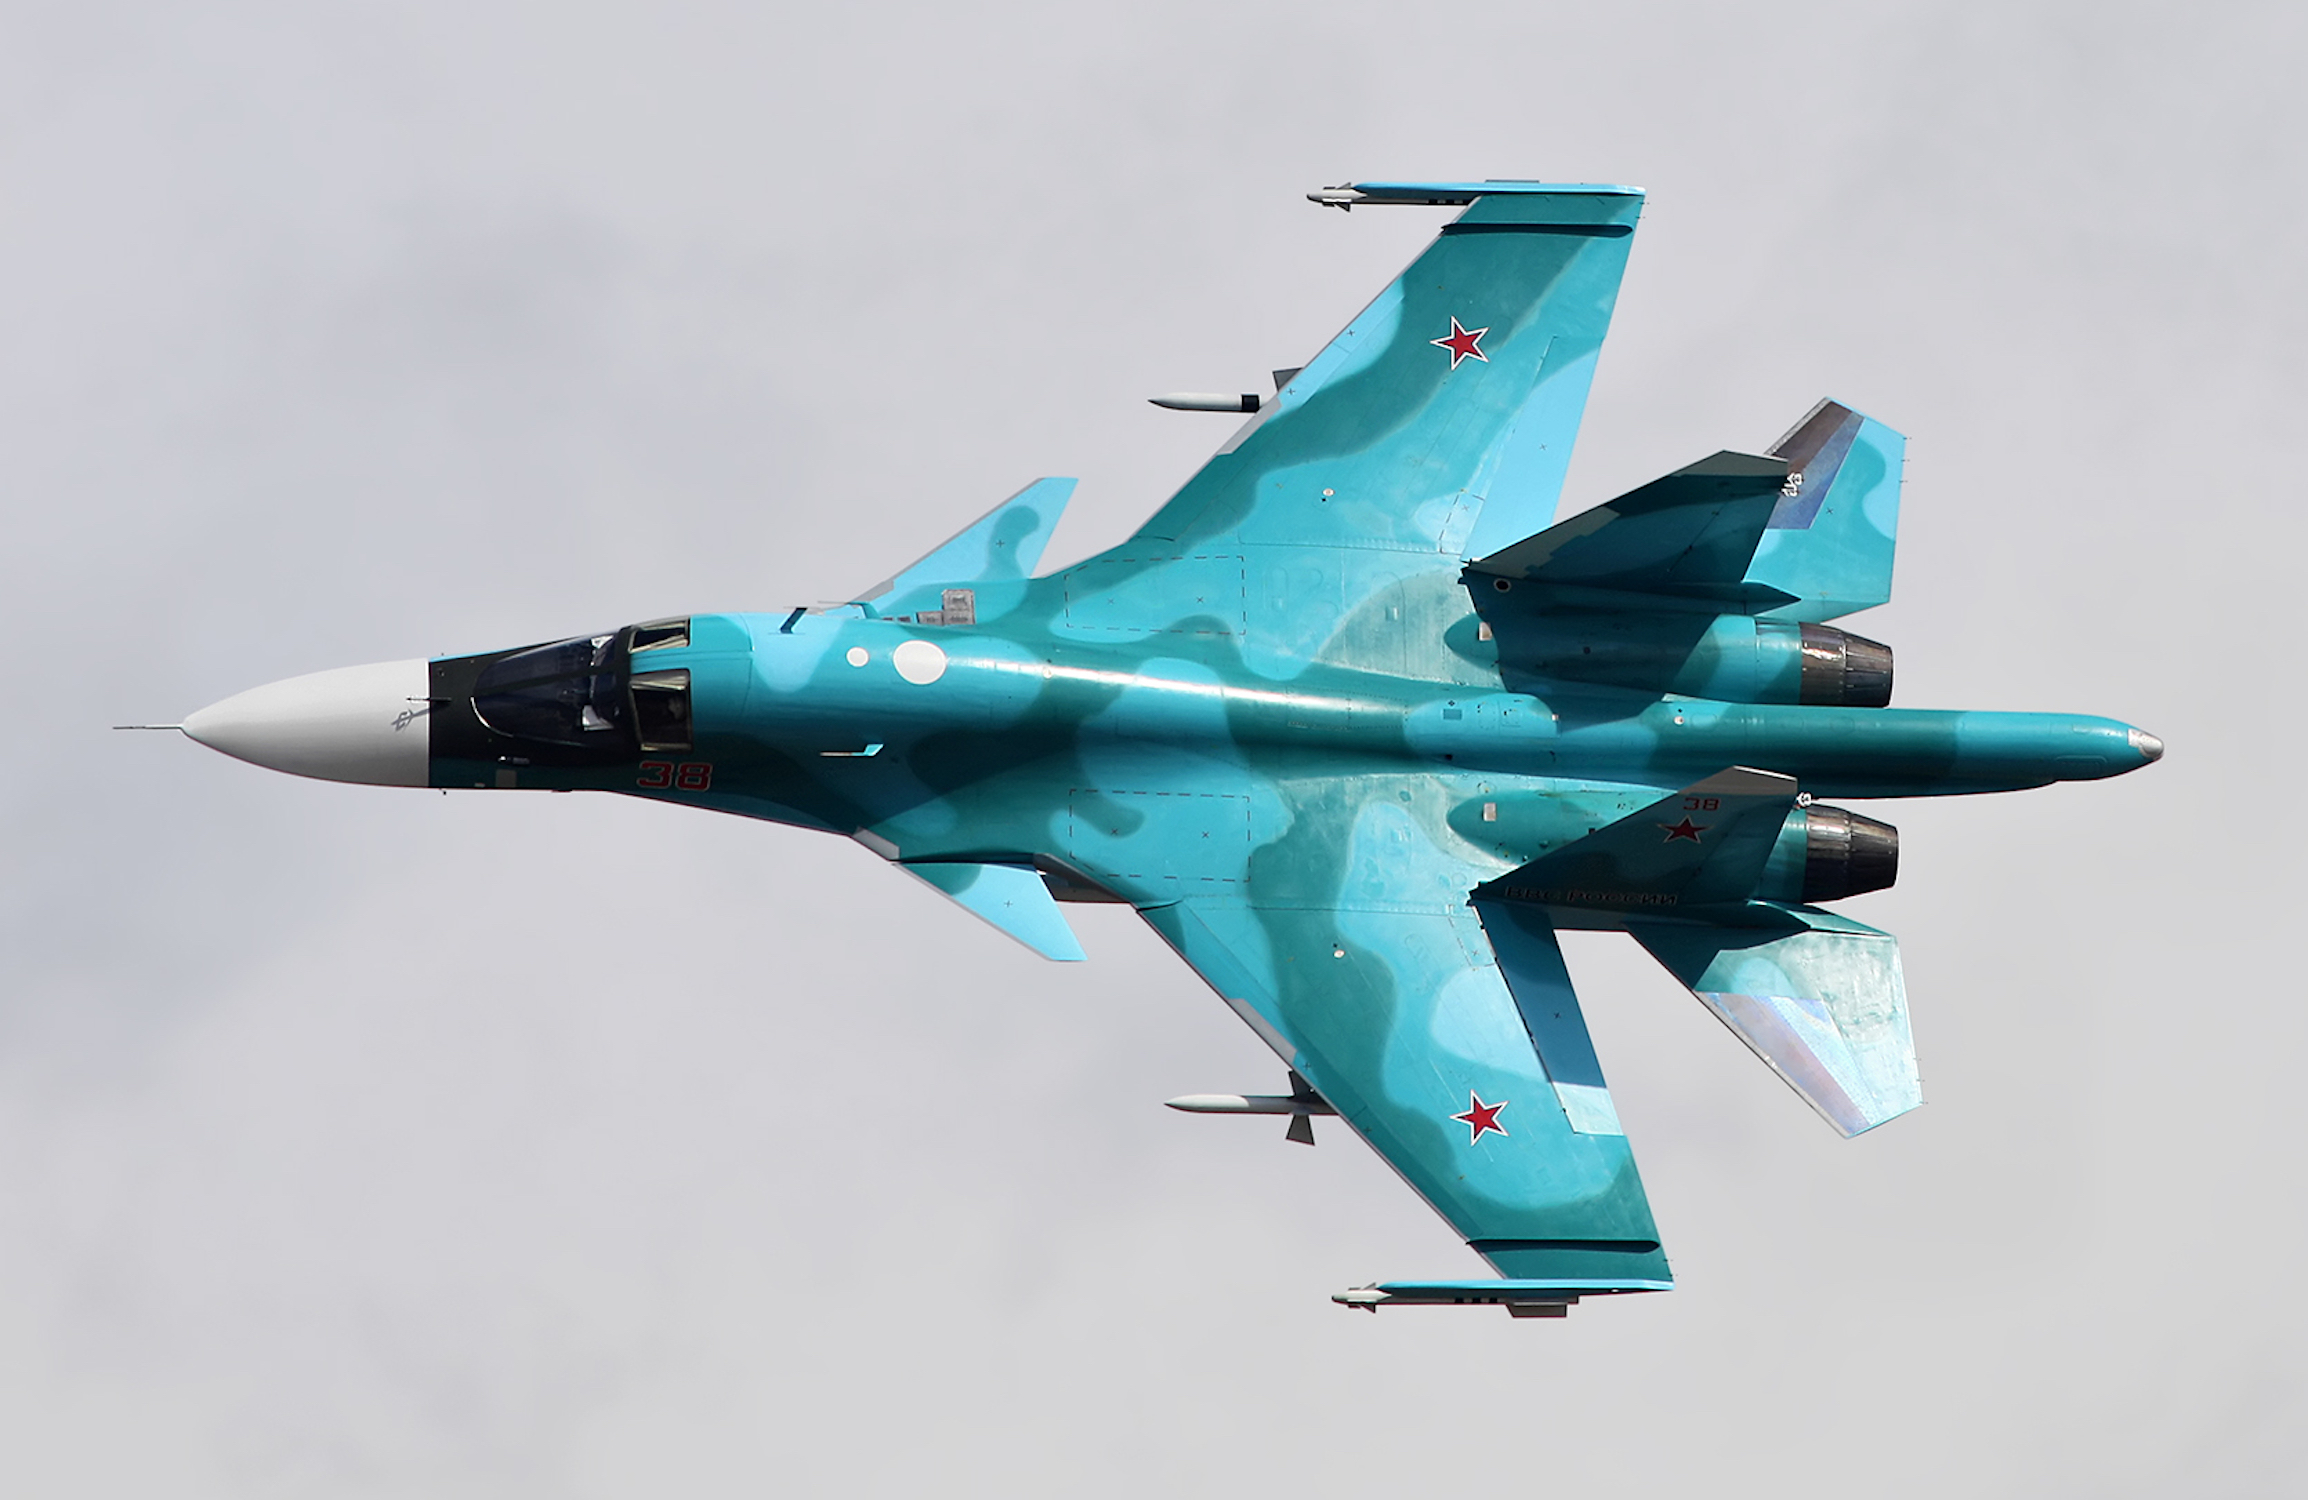 Russian air force Su-34 fighter jet